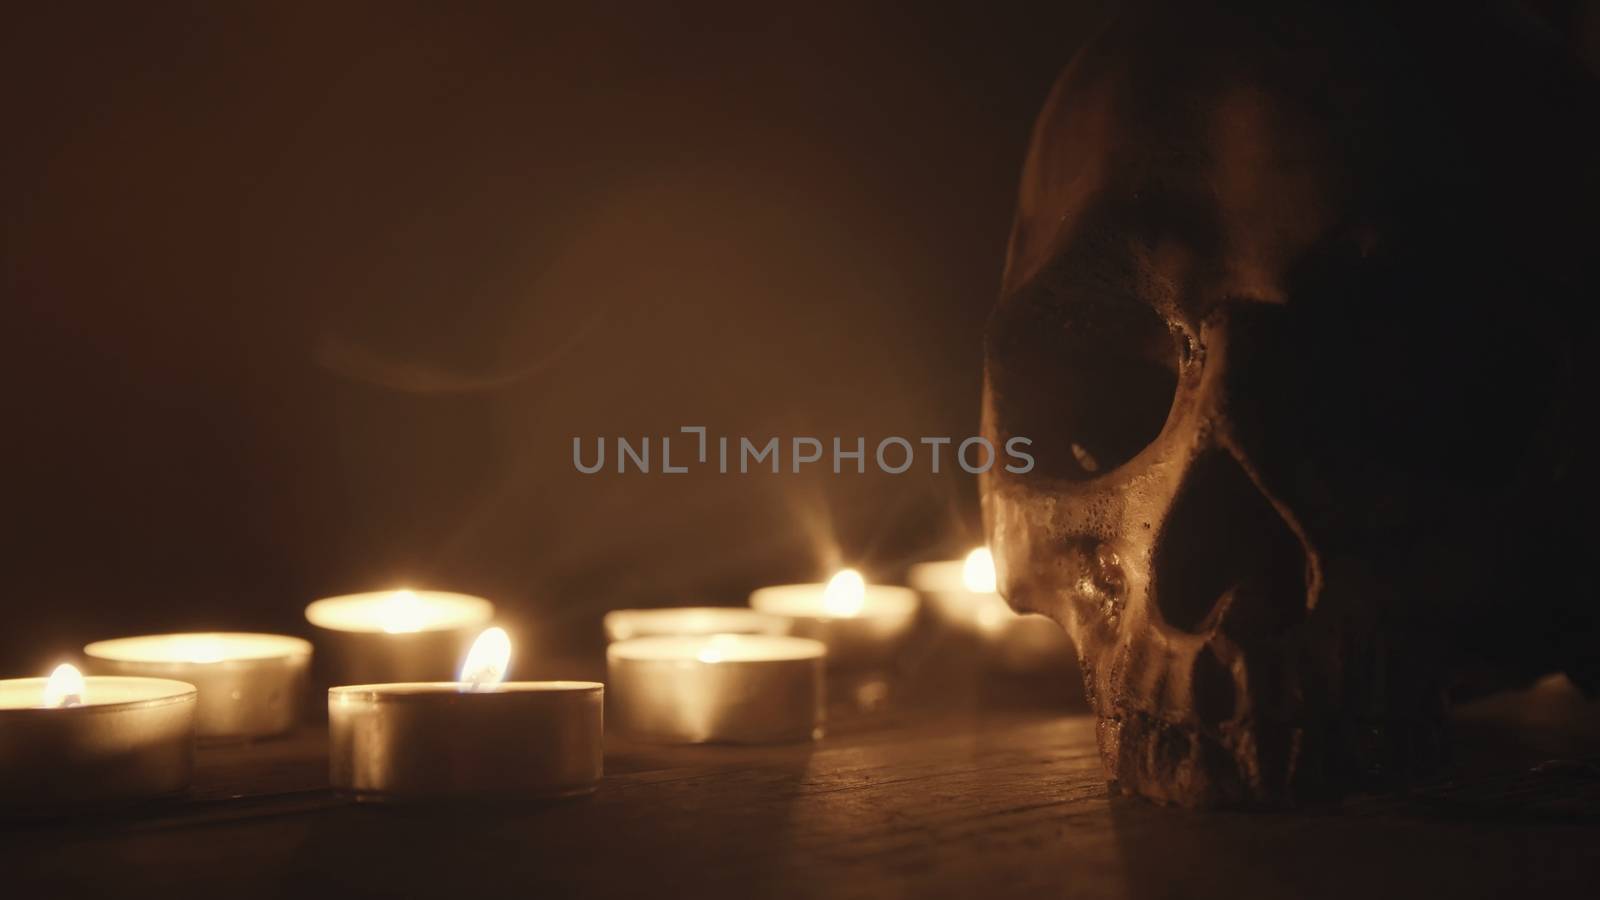 Candles and skull closeup photo by svedoliver